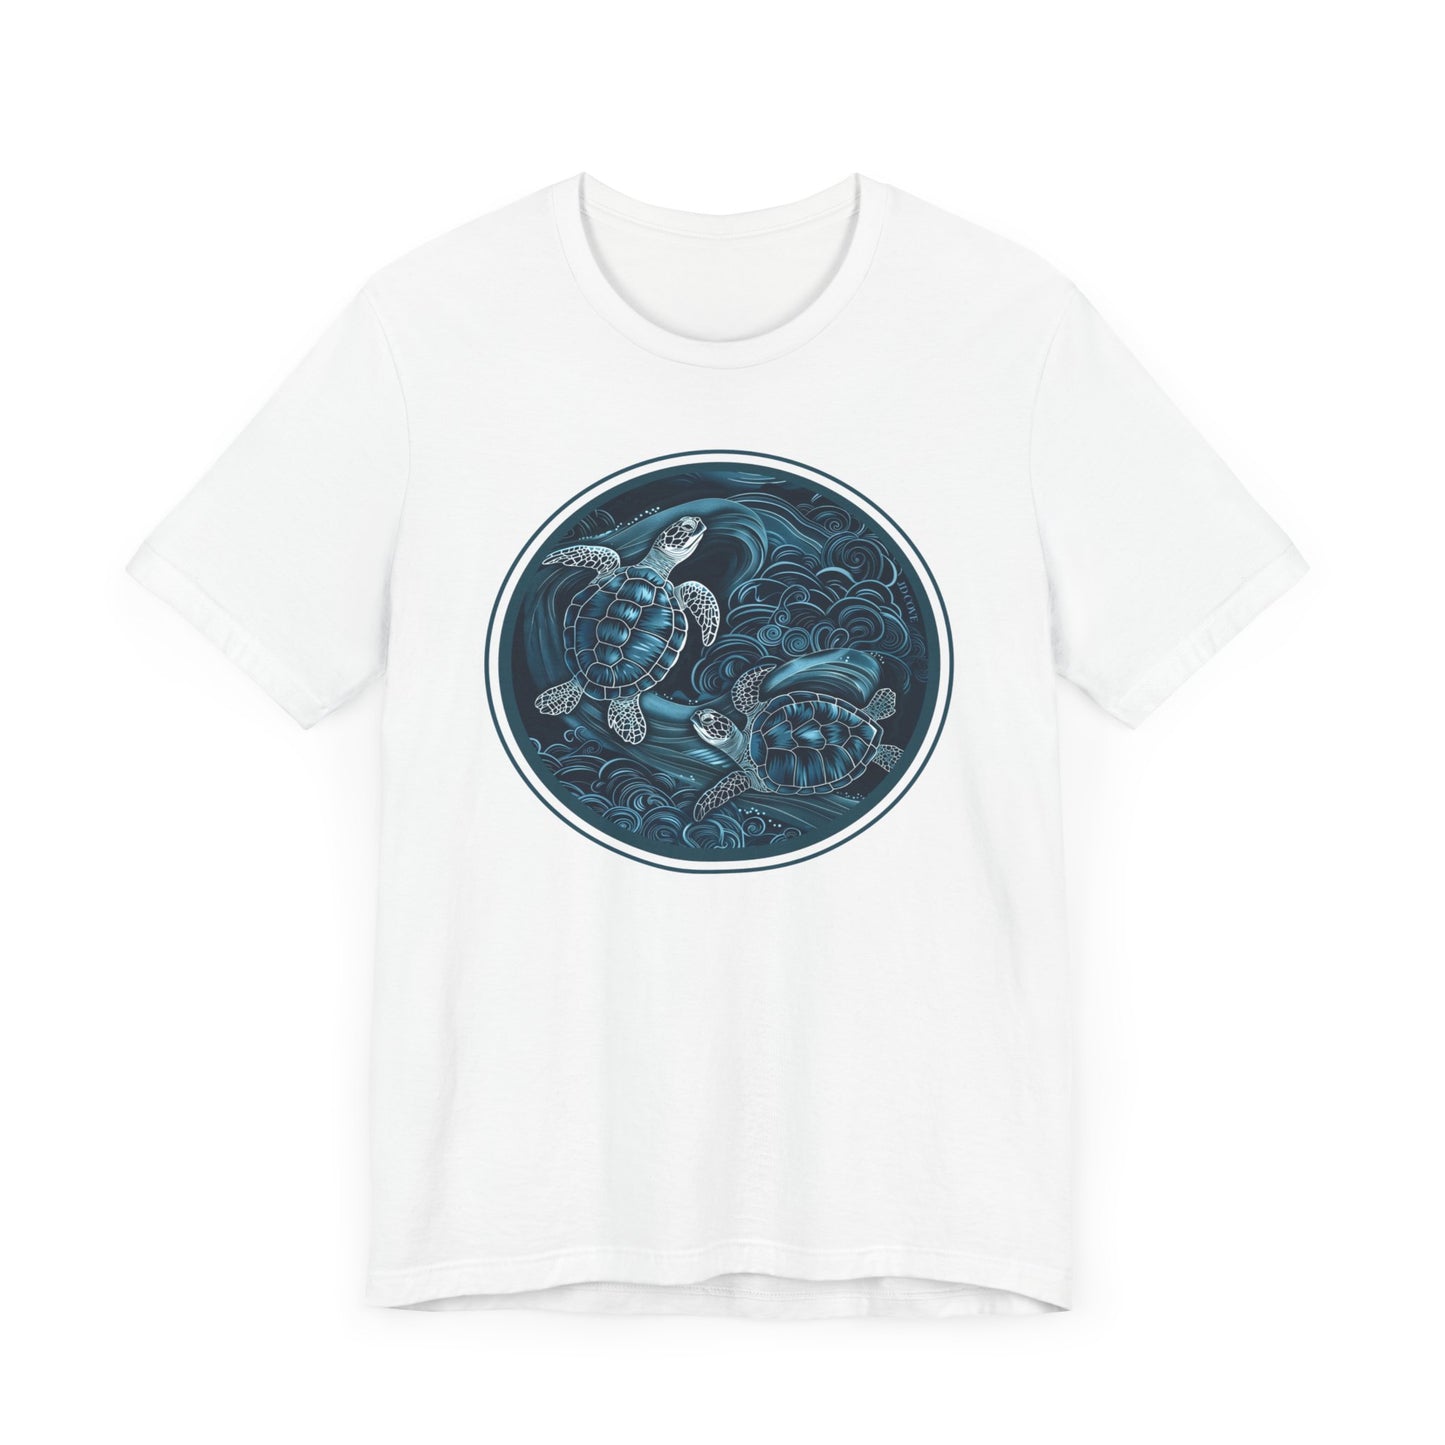 Mystic Sea Turtles Graphic Tee - Unisex Eco-Friendly Cotton Shirt by JD Cove